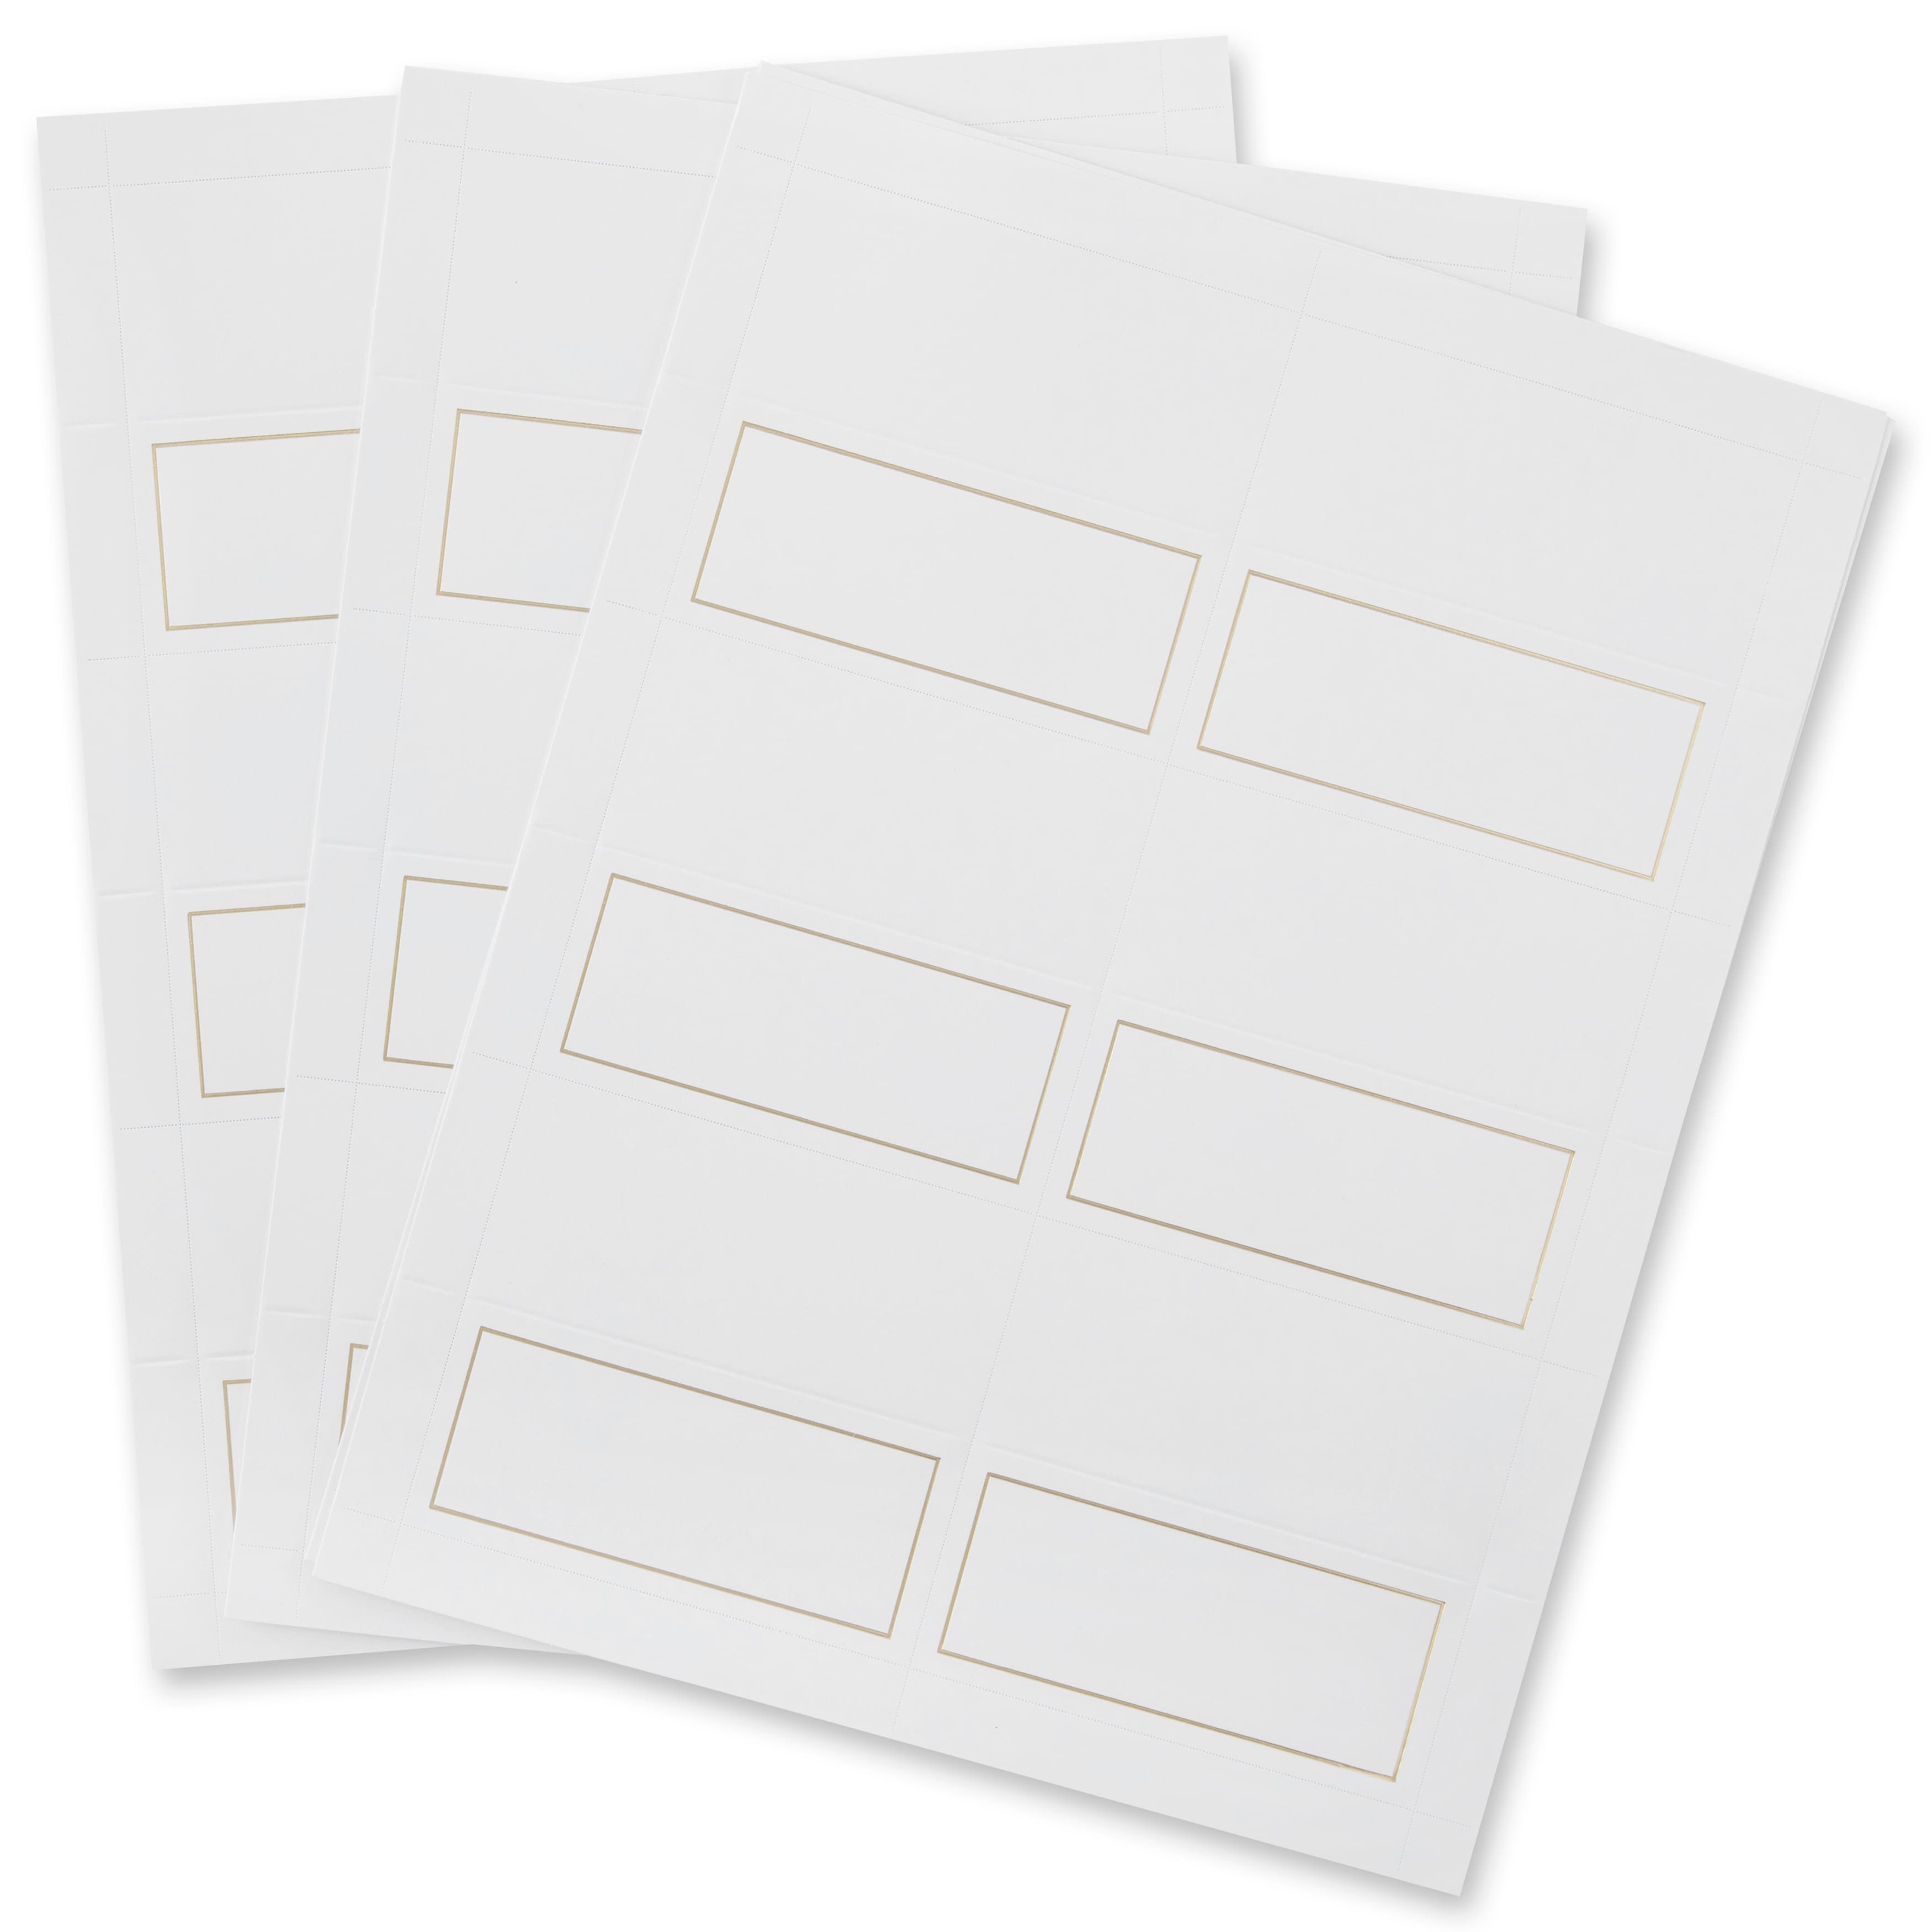 12 Packs 48 ct. (576 total) Gold Border Place Cards by Recollections